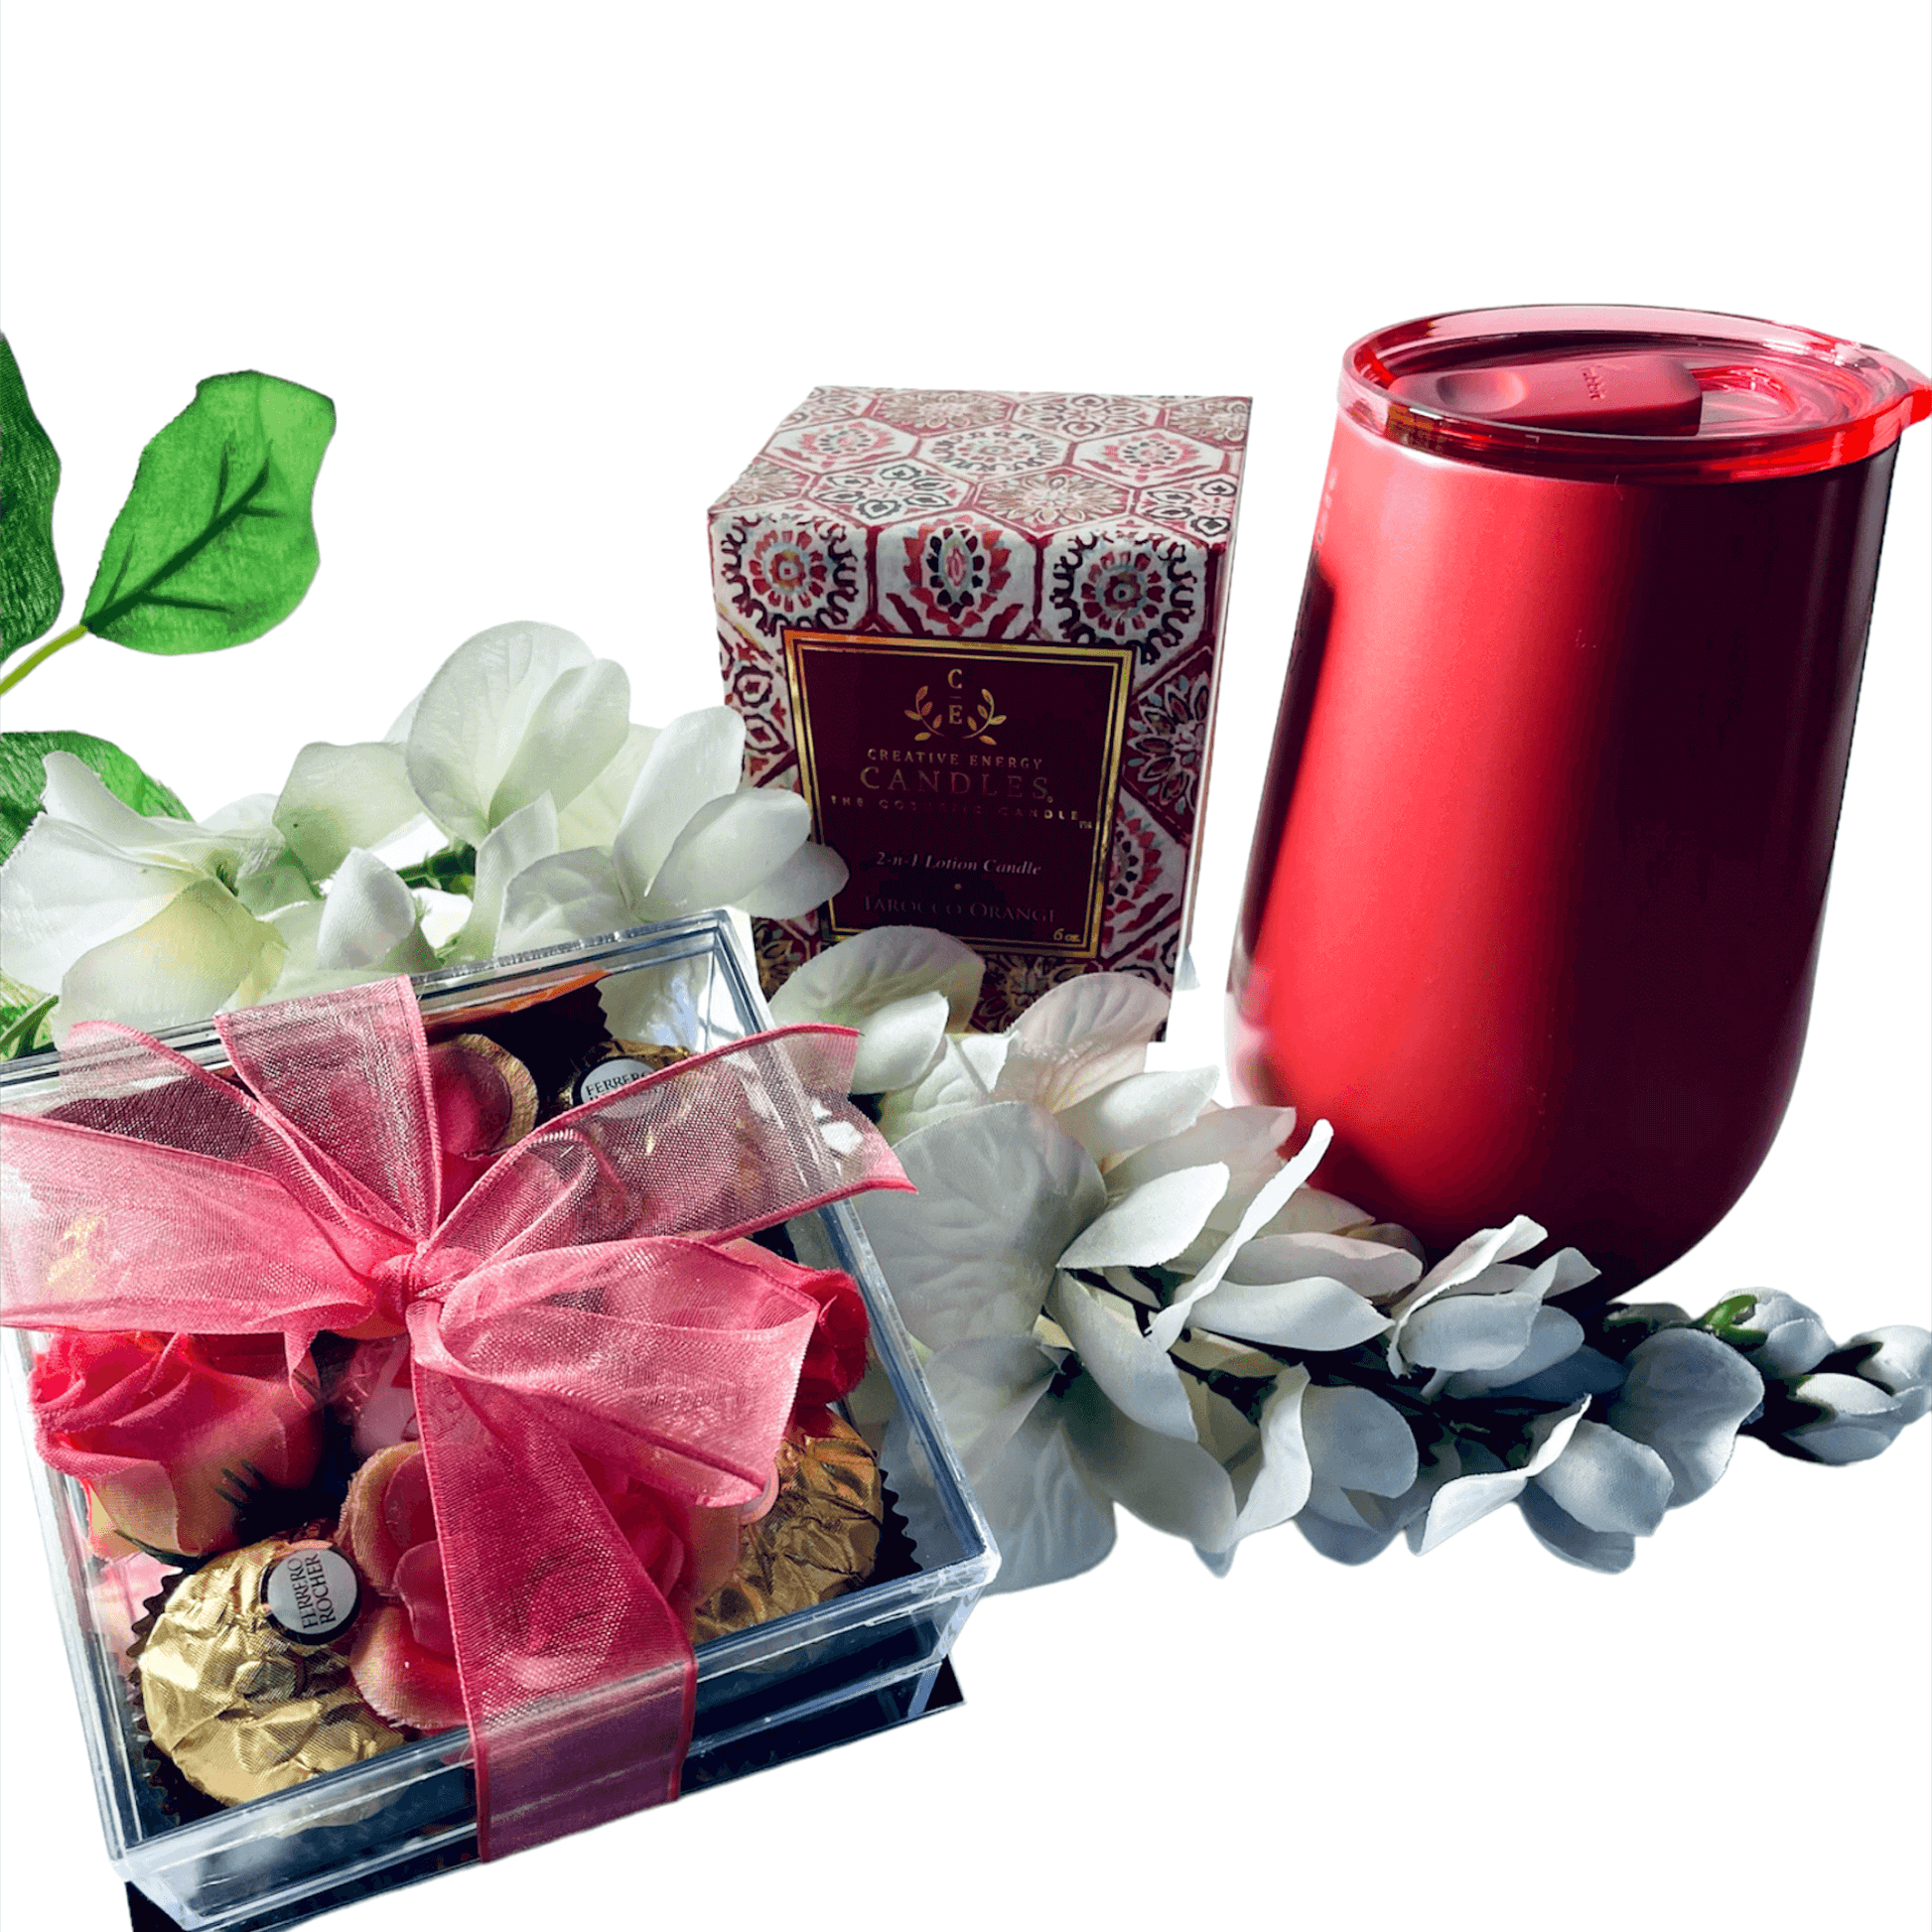 Captivating coral-toned candle and drinkware gift set surrounded by delicate white flowers and lush green leaves, creating a serene and elegant presentation.